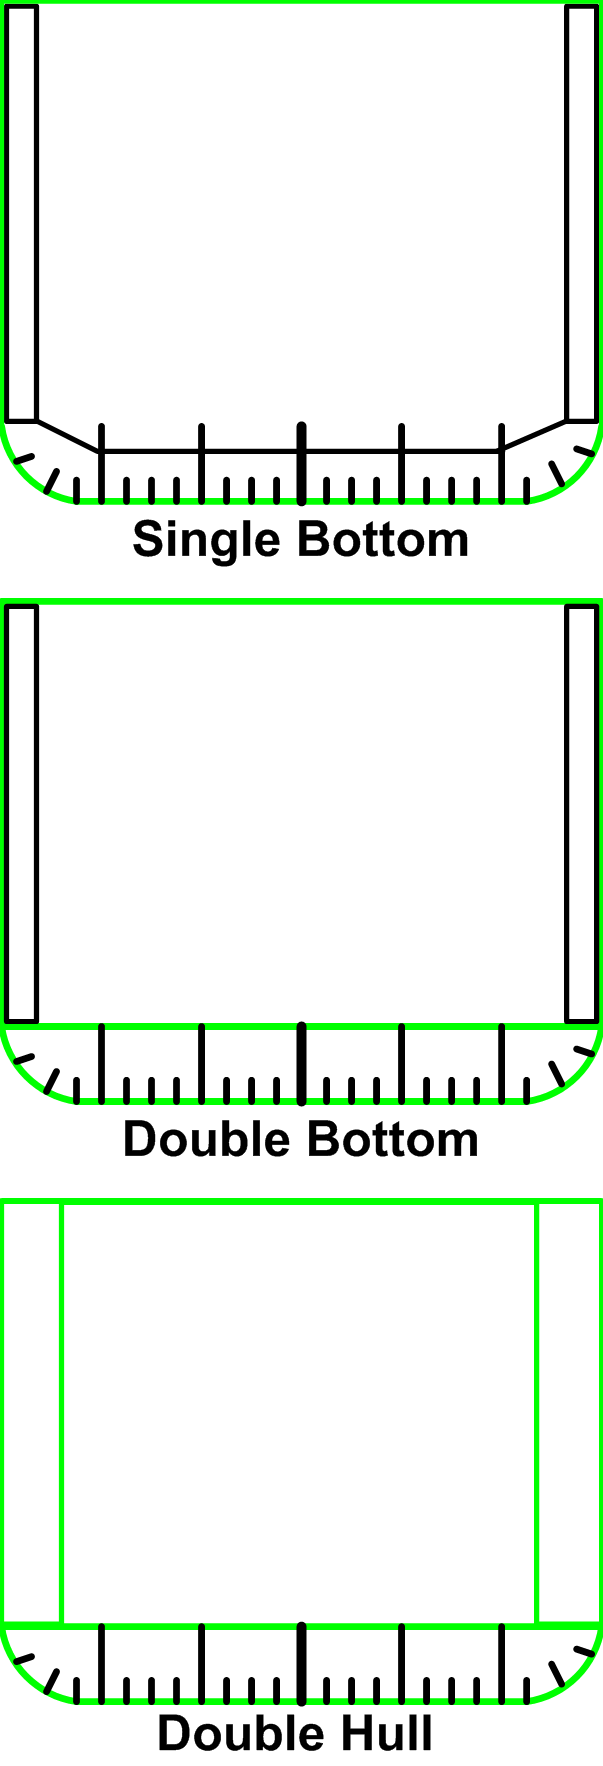 Single hull, double bottom, and double hull ship cross sections. Green lines are watertight; black structure is not watertight